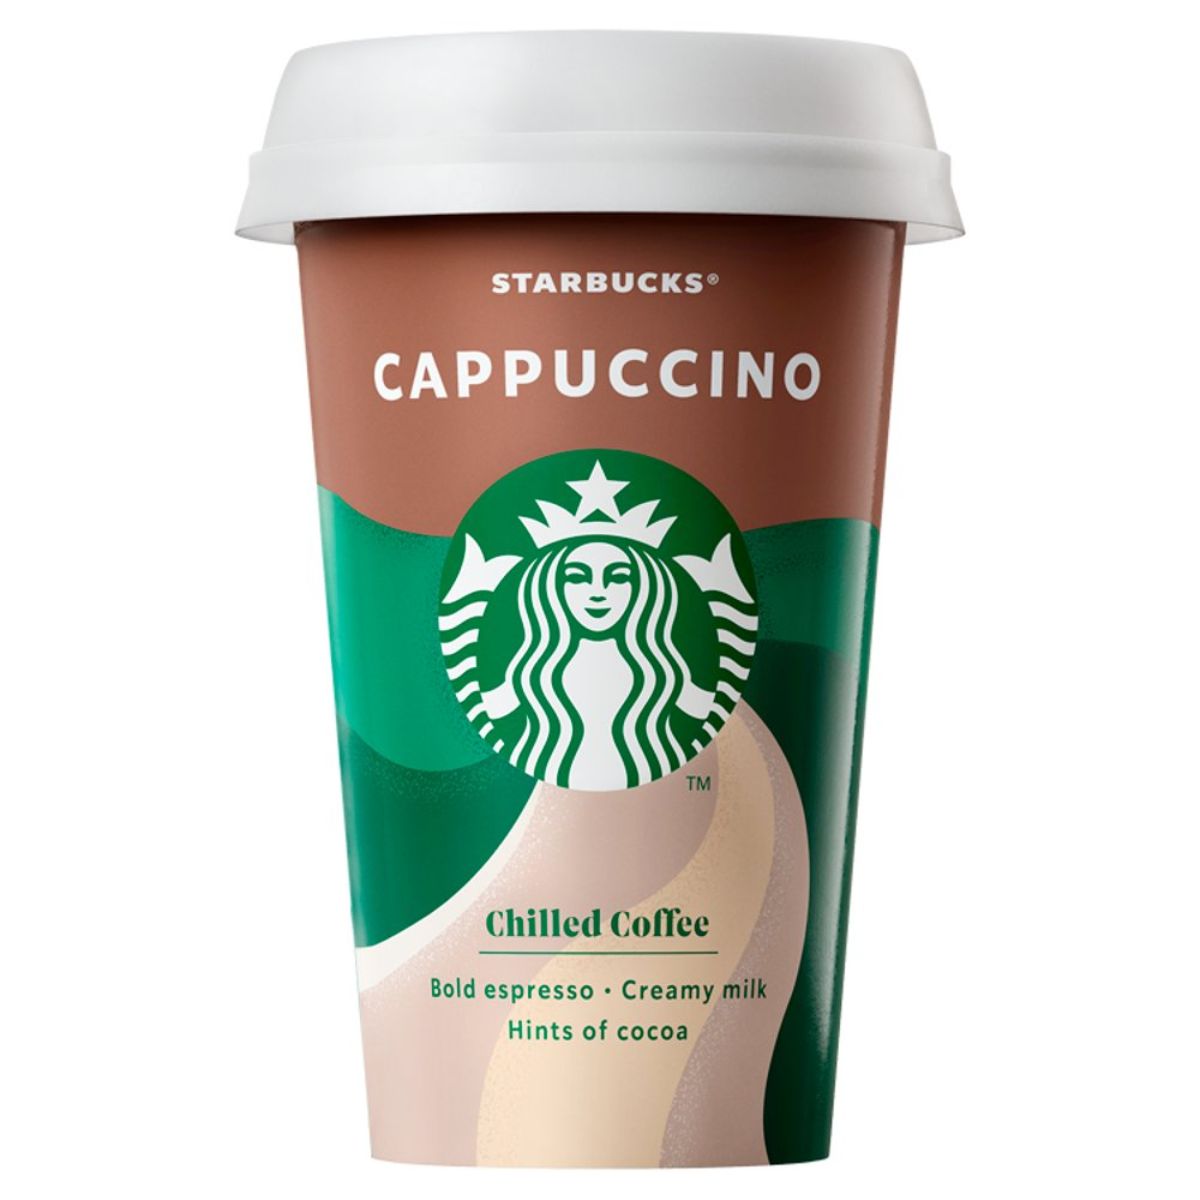 Starbucks - Cappuccino Chilled Coffee - 220ml iced coffee.